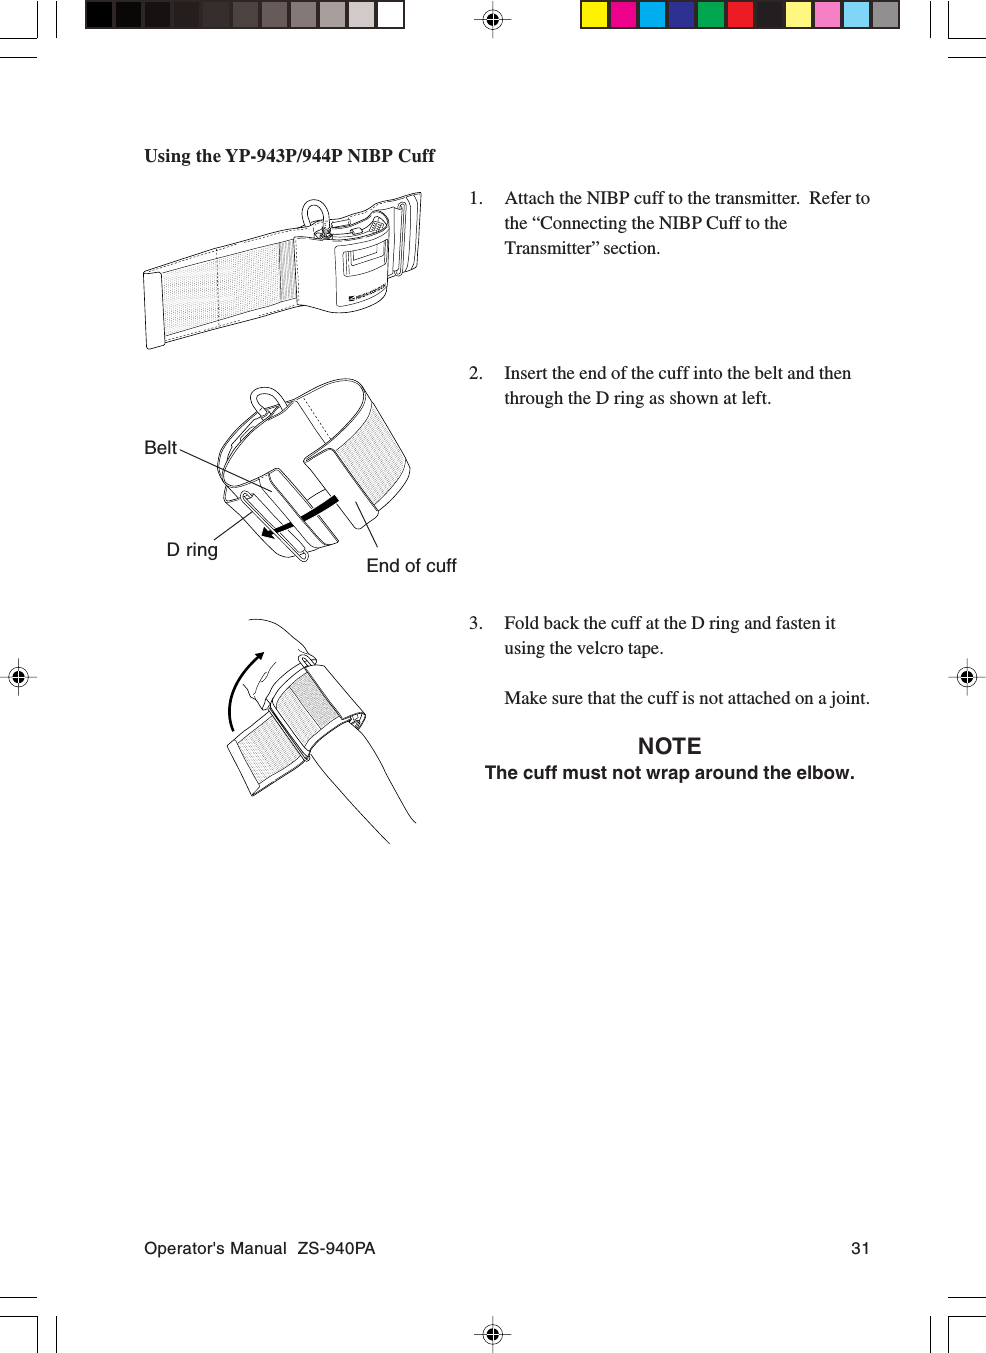 Operator&apos;s Manual  ZS-940PA 31Using the YP-943P/944P NIBP Cuff1. Attach the NIBP cuff to the transmitter.  Refer tothe “Connecting the NIBP Cuff to theTransmitter” section.2. Insert the end of the cuff into the belt and thenthrough the D ring as shown at left.3. Fold back the cuff at the D ring and fasten itusing the velcro tape.Make sure that the cuff is not attached on a joint.NOTEThe cuff must not wrap around the elbow.D ringBeltEnd of cuff